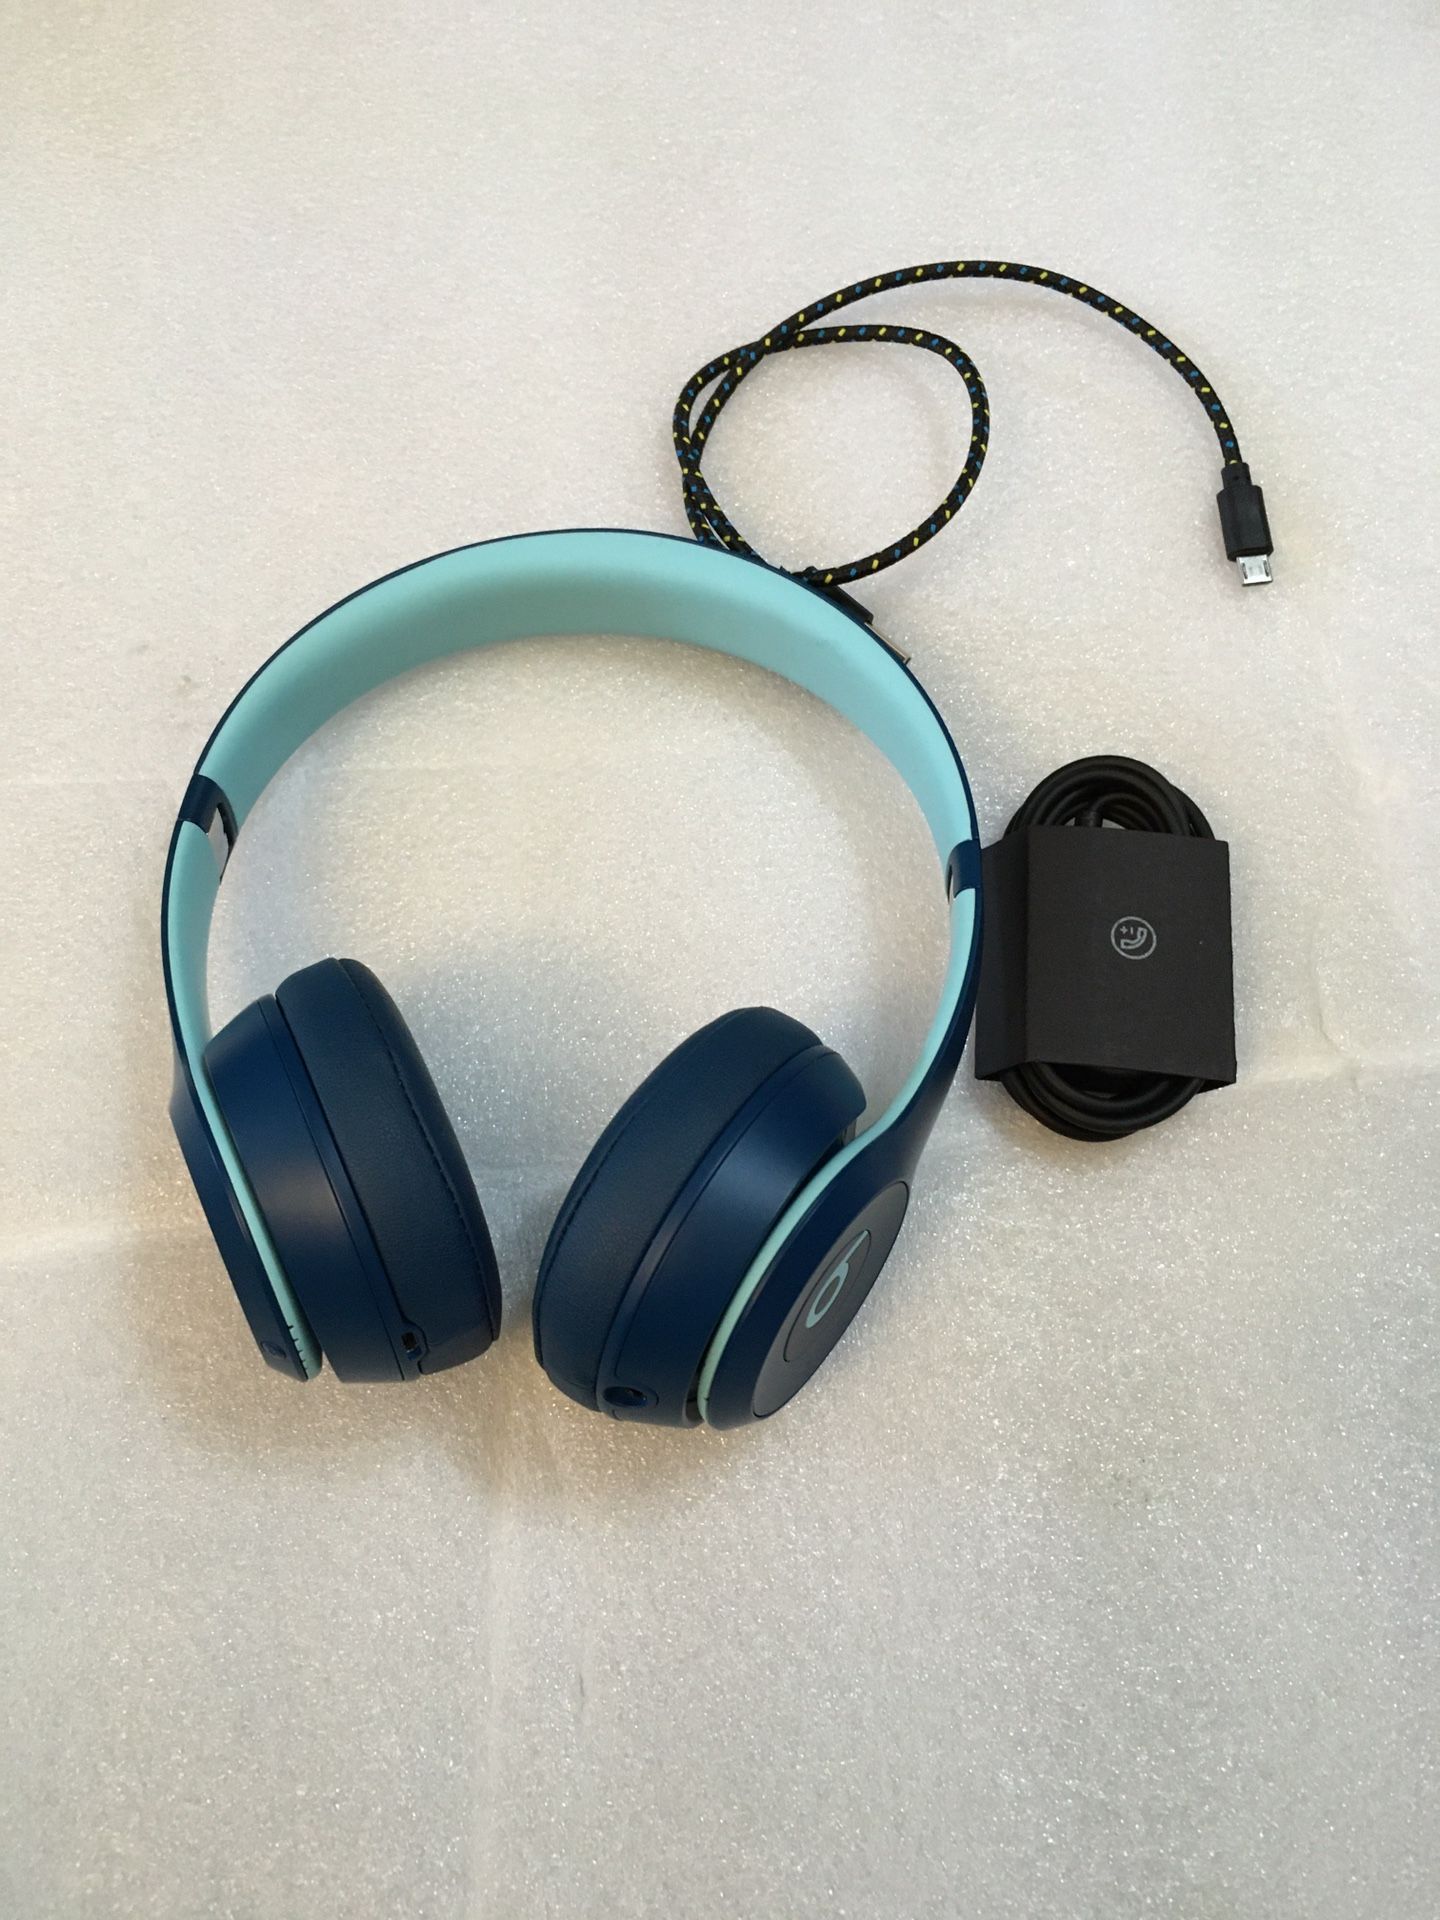 Beats by Dre - Beats Solo3 Wireless On-Ear Headphones - Blue / green - A1796.   In used good condition . Tested and working perfect .  Comes with Aux 